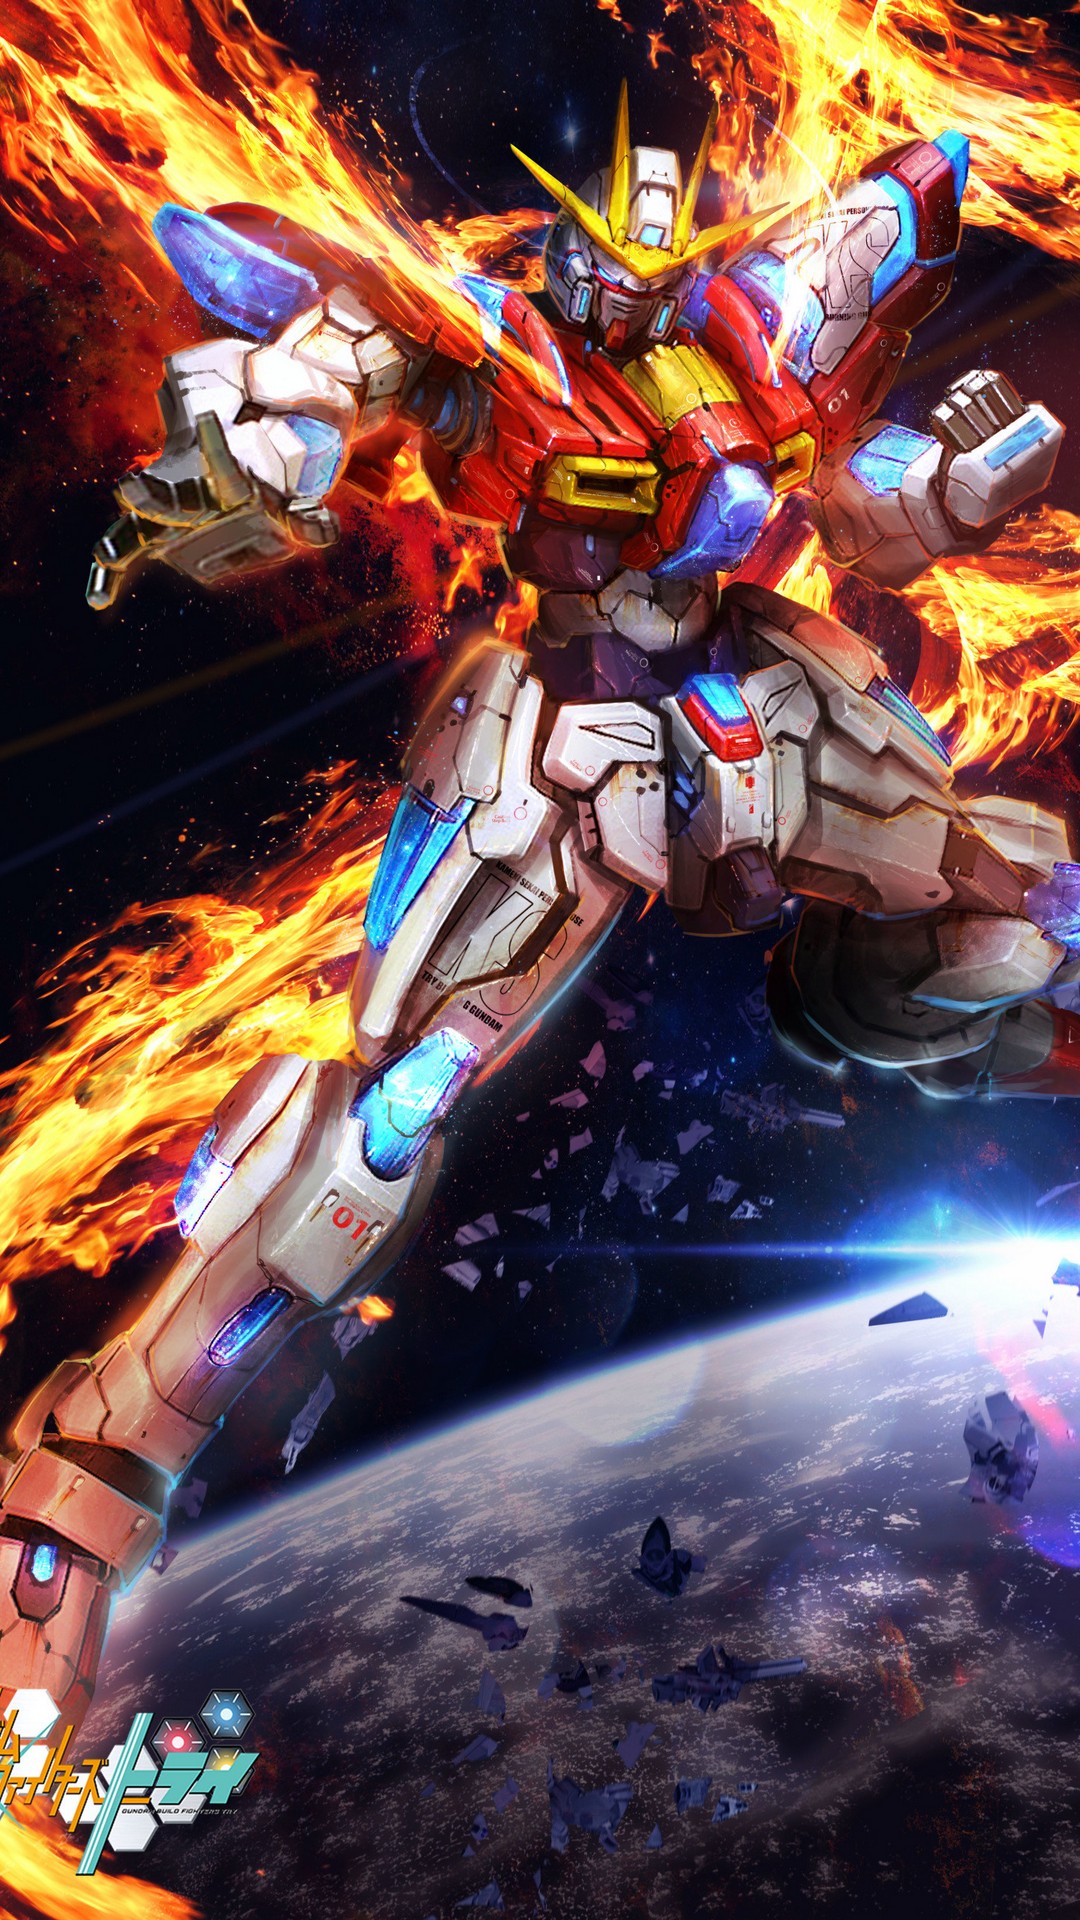 Gundam Wallpaper iPhone With high-resolution 1080X1920 pixel. You can use this wallpaper for your iPhone 5, 6, 7, 8, X, XS, XR backgrounds, Mobile Screensaver, or iPad Lock Screen